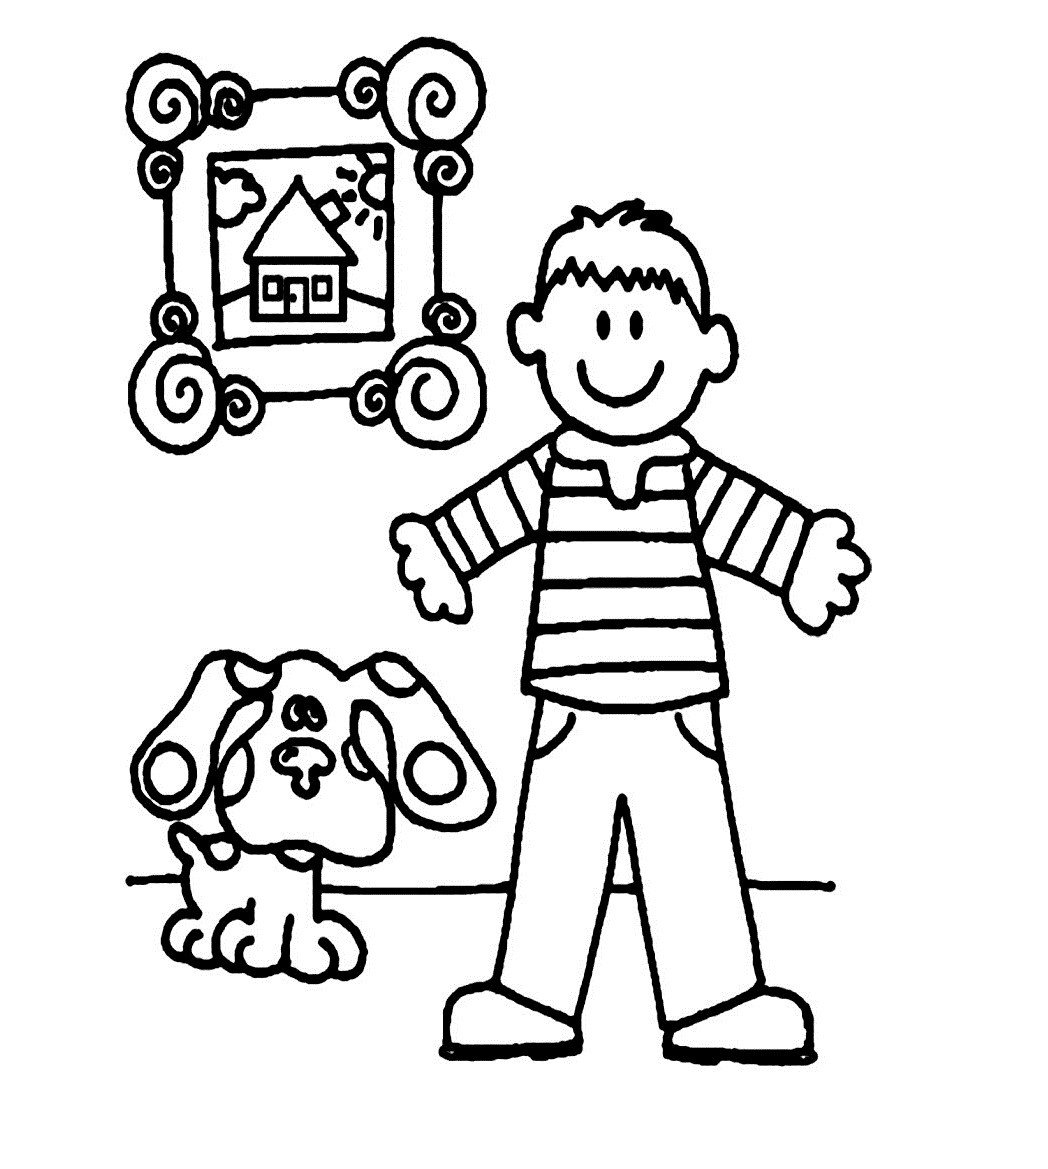 30 Of the Best Ideas for Coloring Pages Kidsboys.com - Home, Family